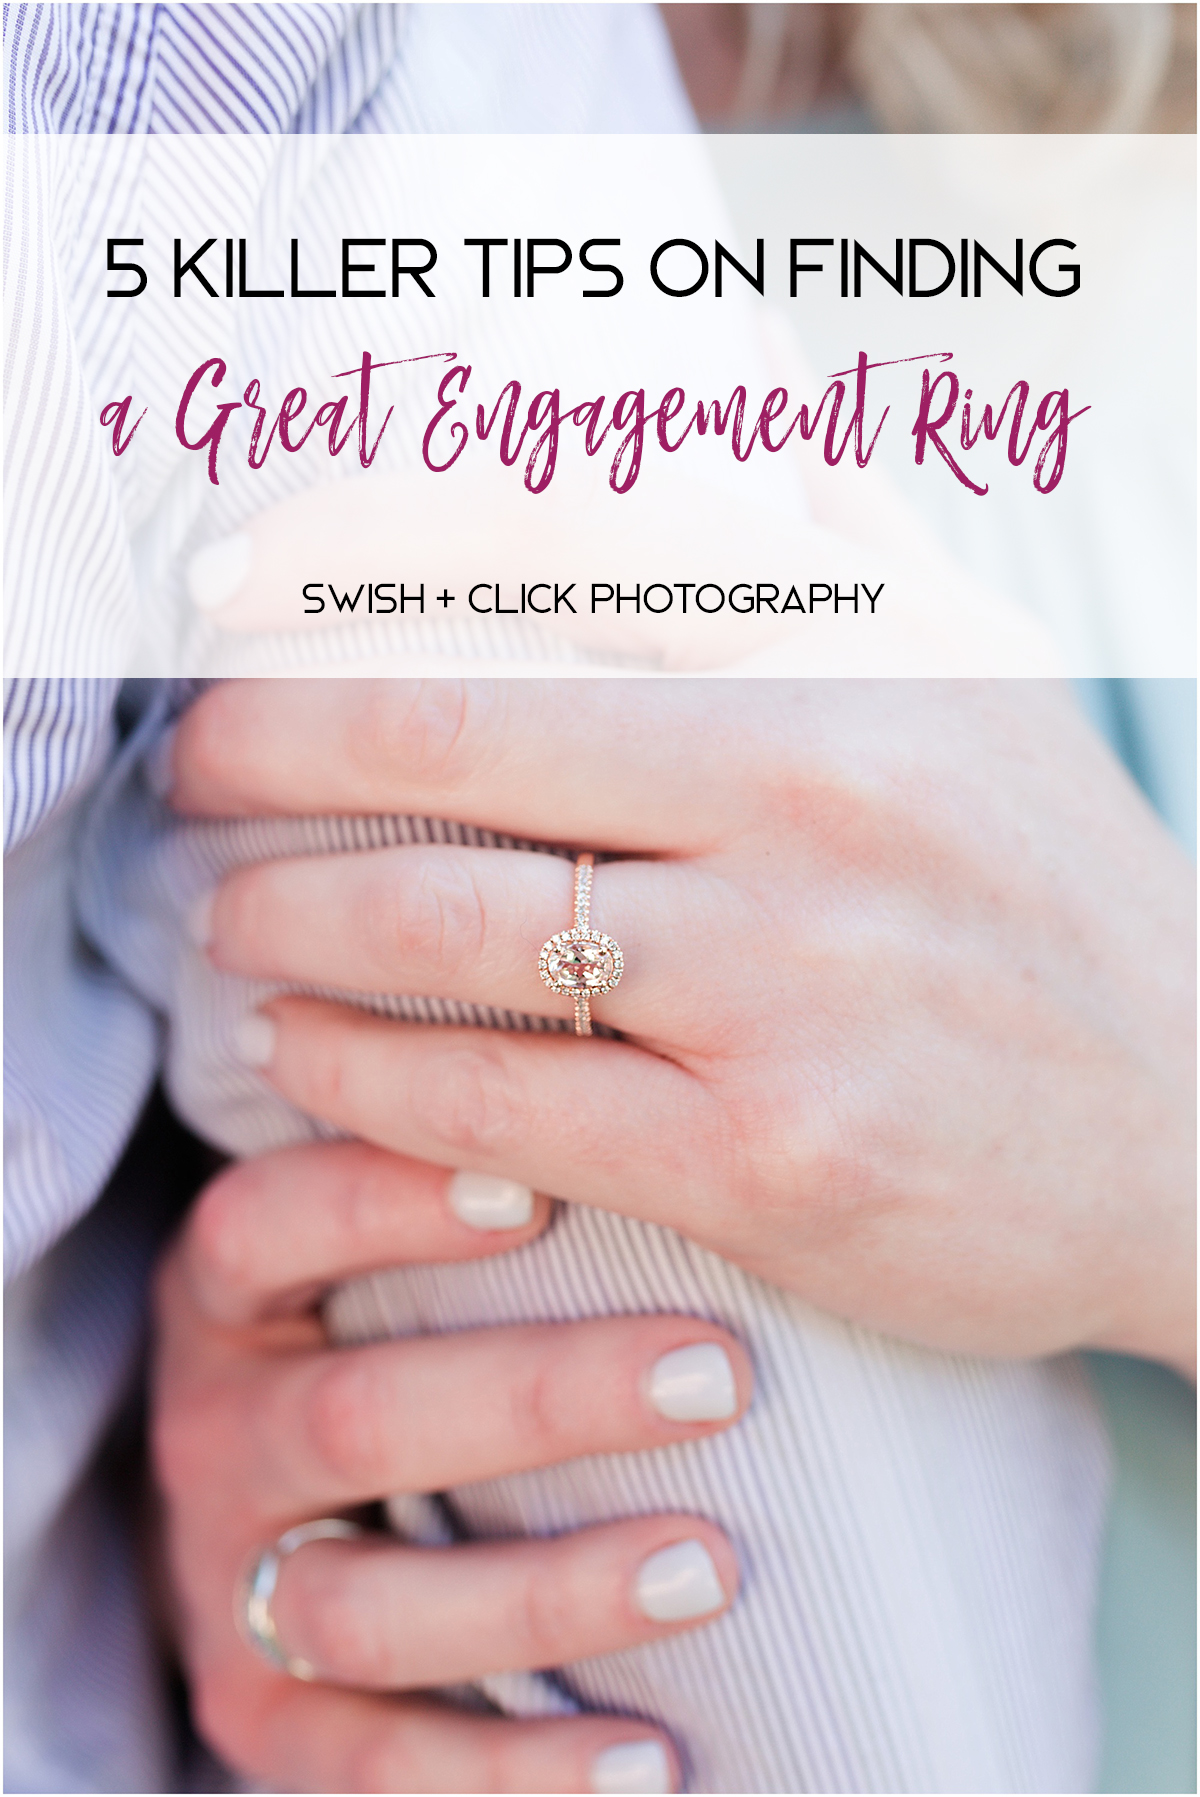 5-Killer-Tips-on-Finding-a-Great-Engagement-Ring